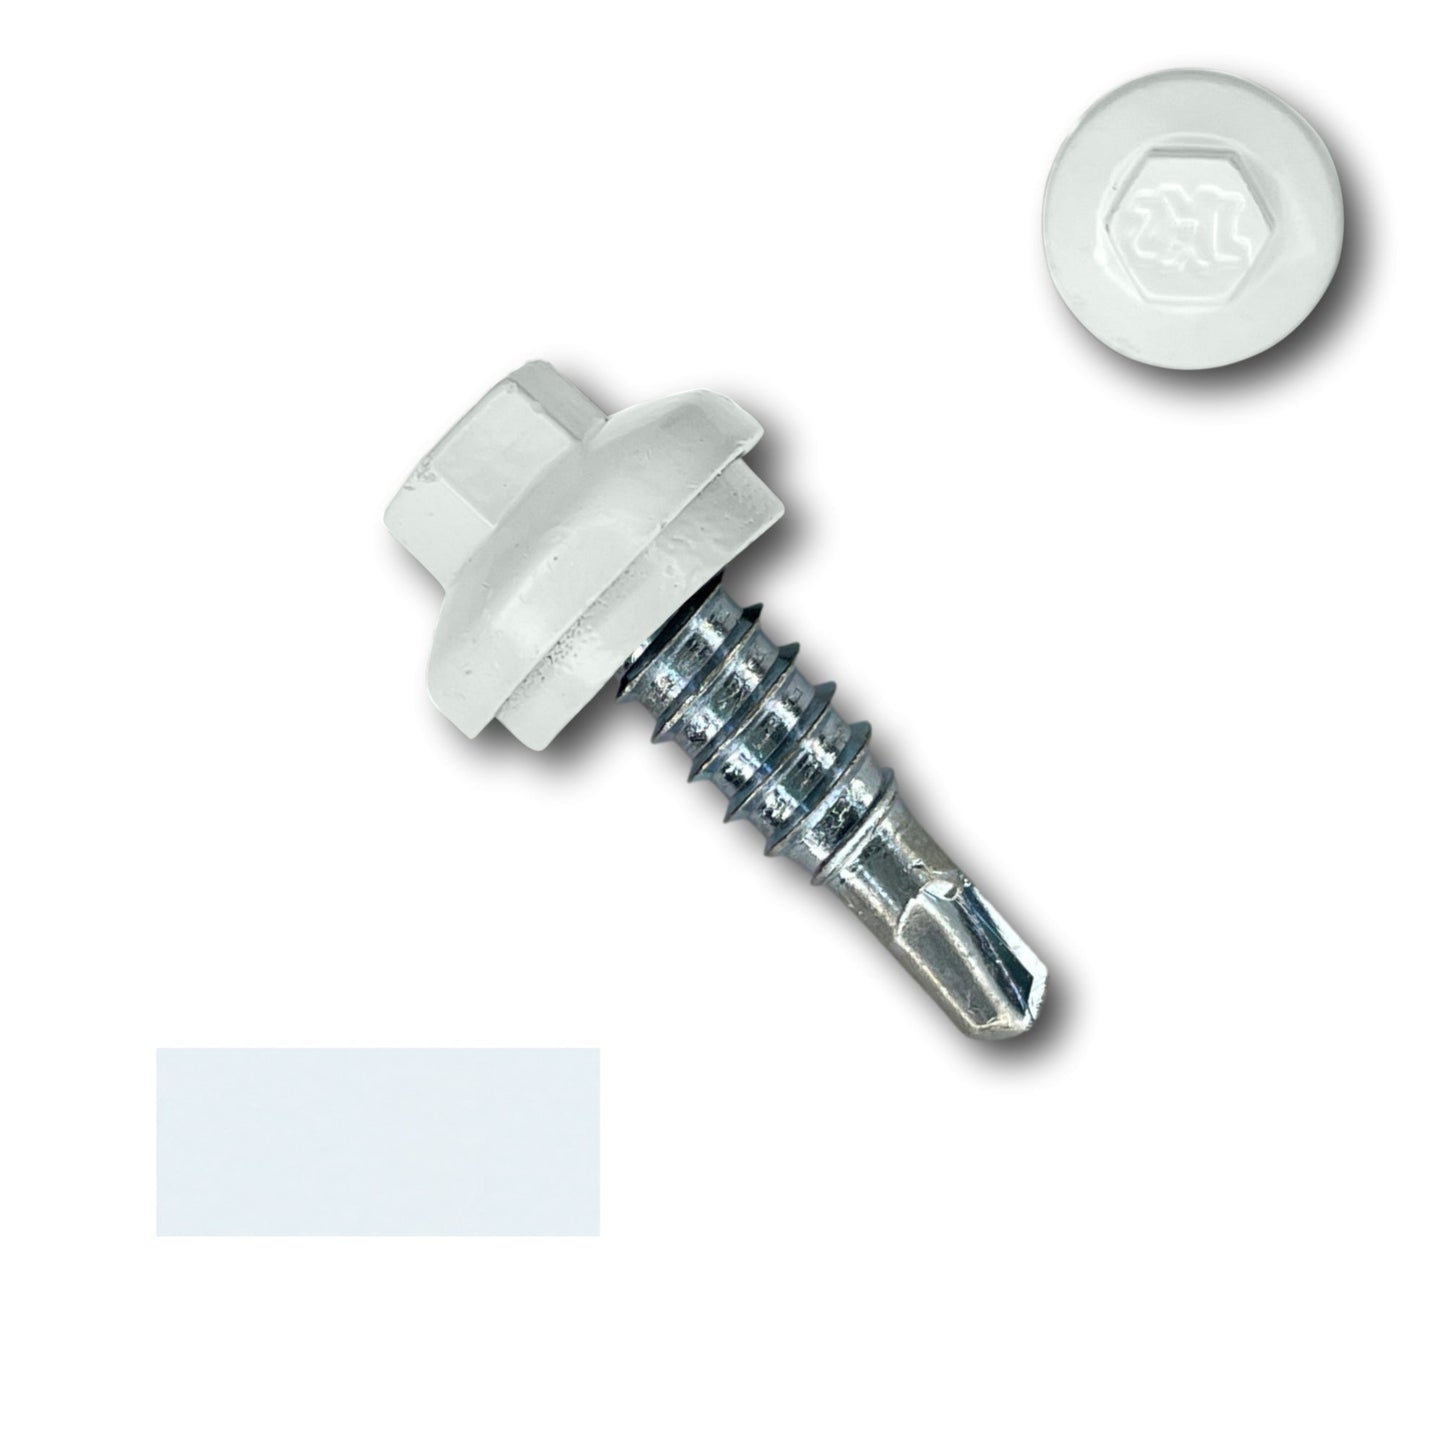 A #14 x 7/8" Stitch Lap ZXL Dome Cap Metal Building Screw, Self-Drilling from Perma Cover with a shiny silver body and a white hexagonal head. The screw appears to have a washer near the head for secure fastening. An identical screw head is shown next to it.